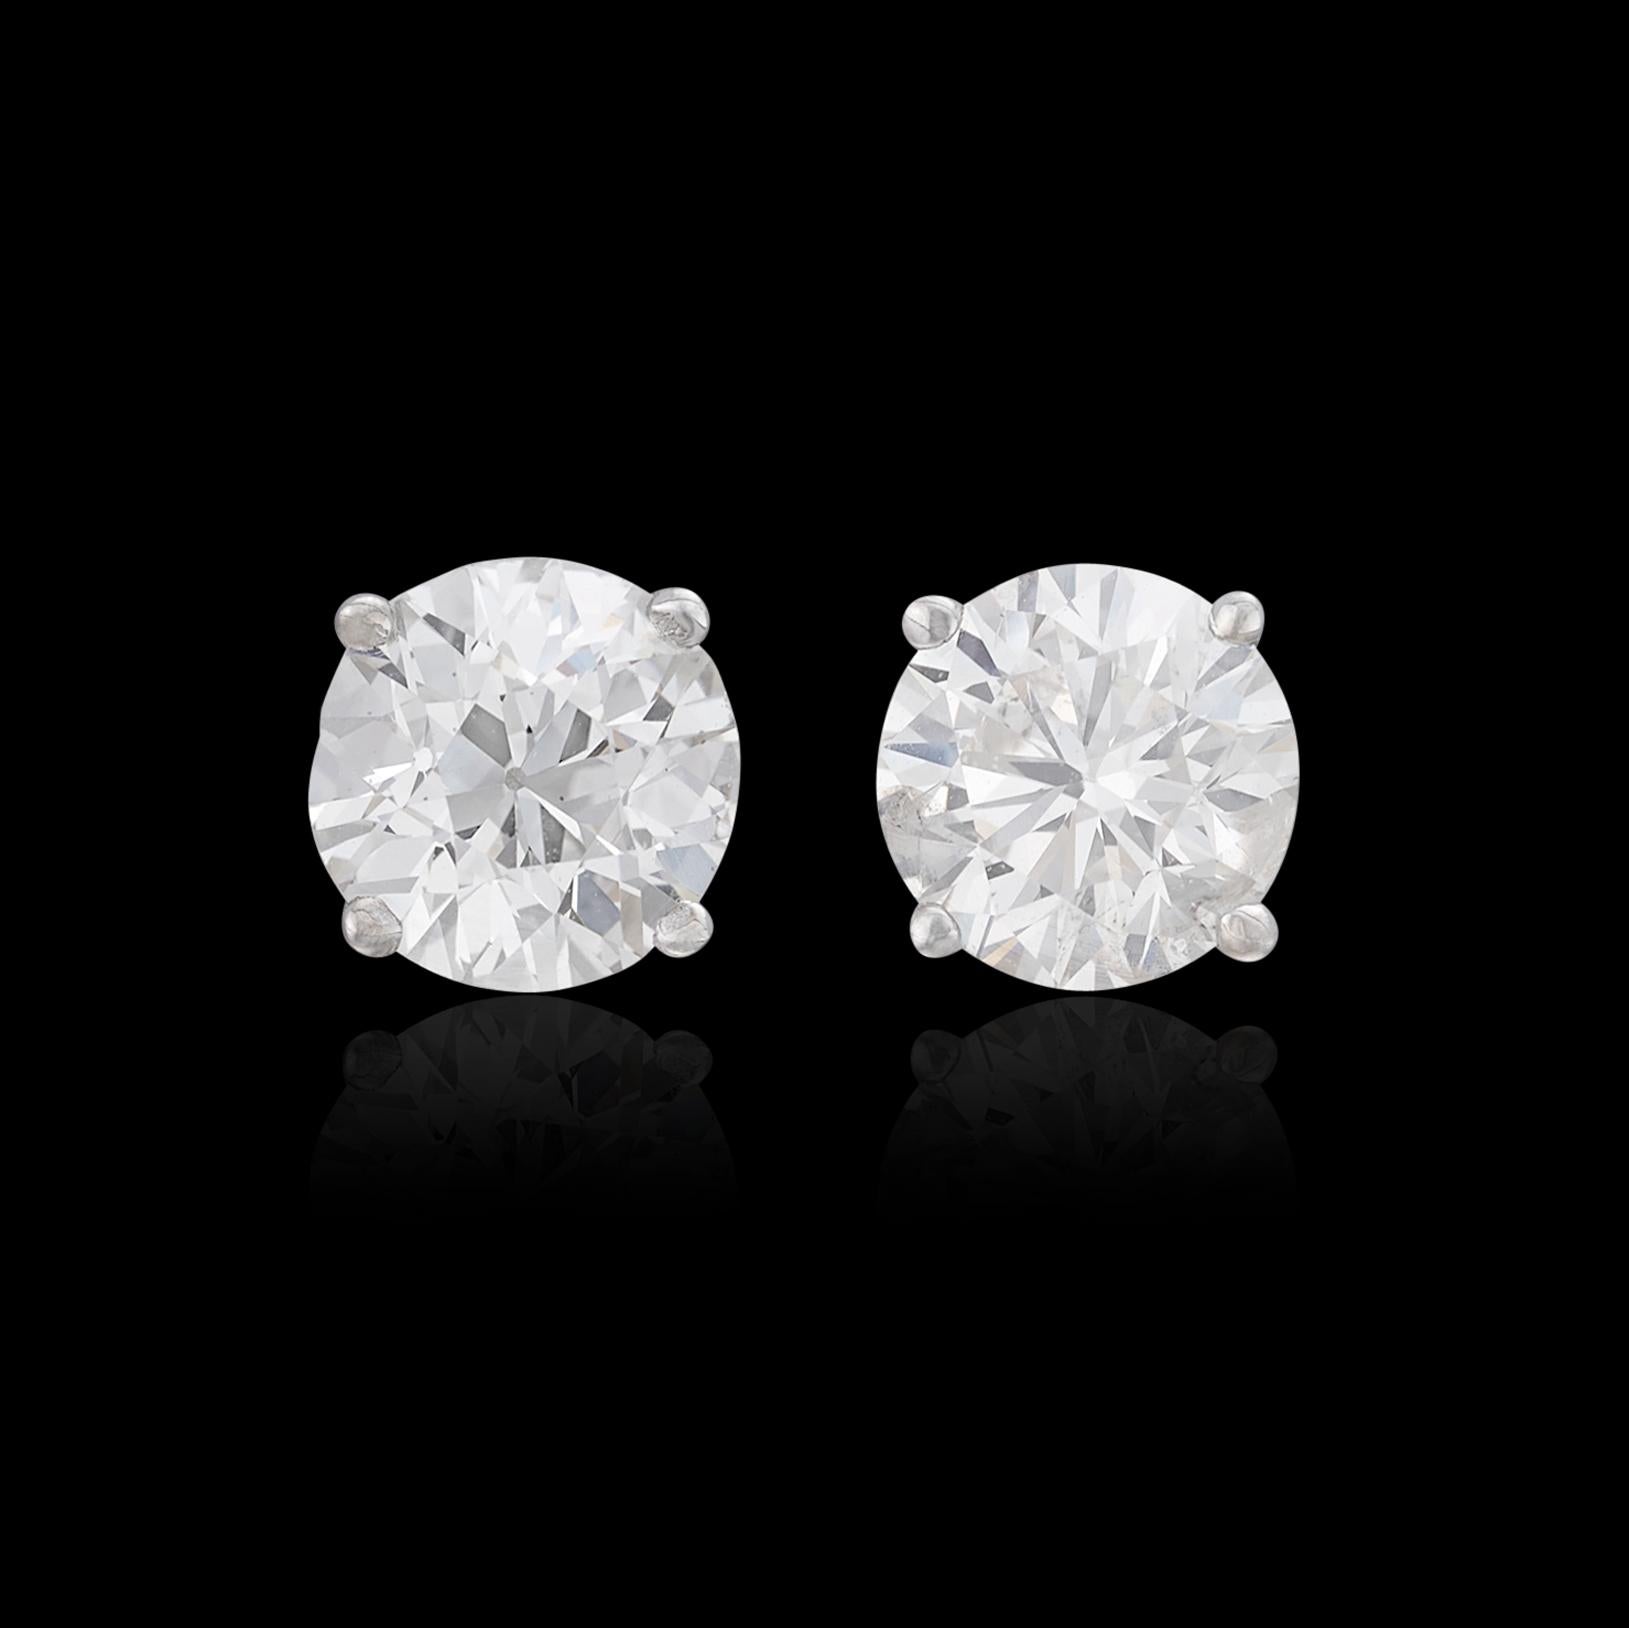 Sparkling diamond stud earrings are a must for any collection! Set in 14k white gold, the two round brilliant-cut diamonds weigh approximately 1.52 carats and have been graded  I/VS-SI. The studs weigh 1.1 grams. Brilliant and eye-catching, these